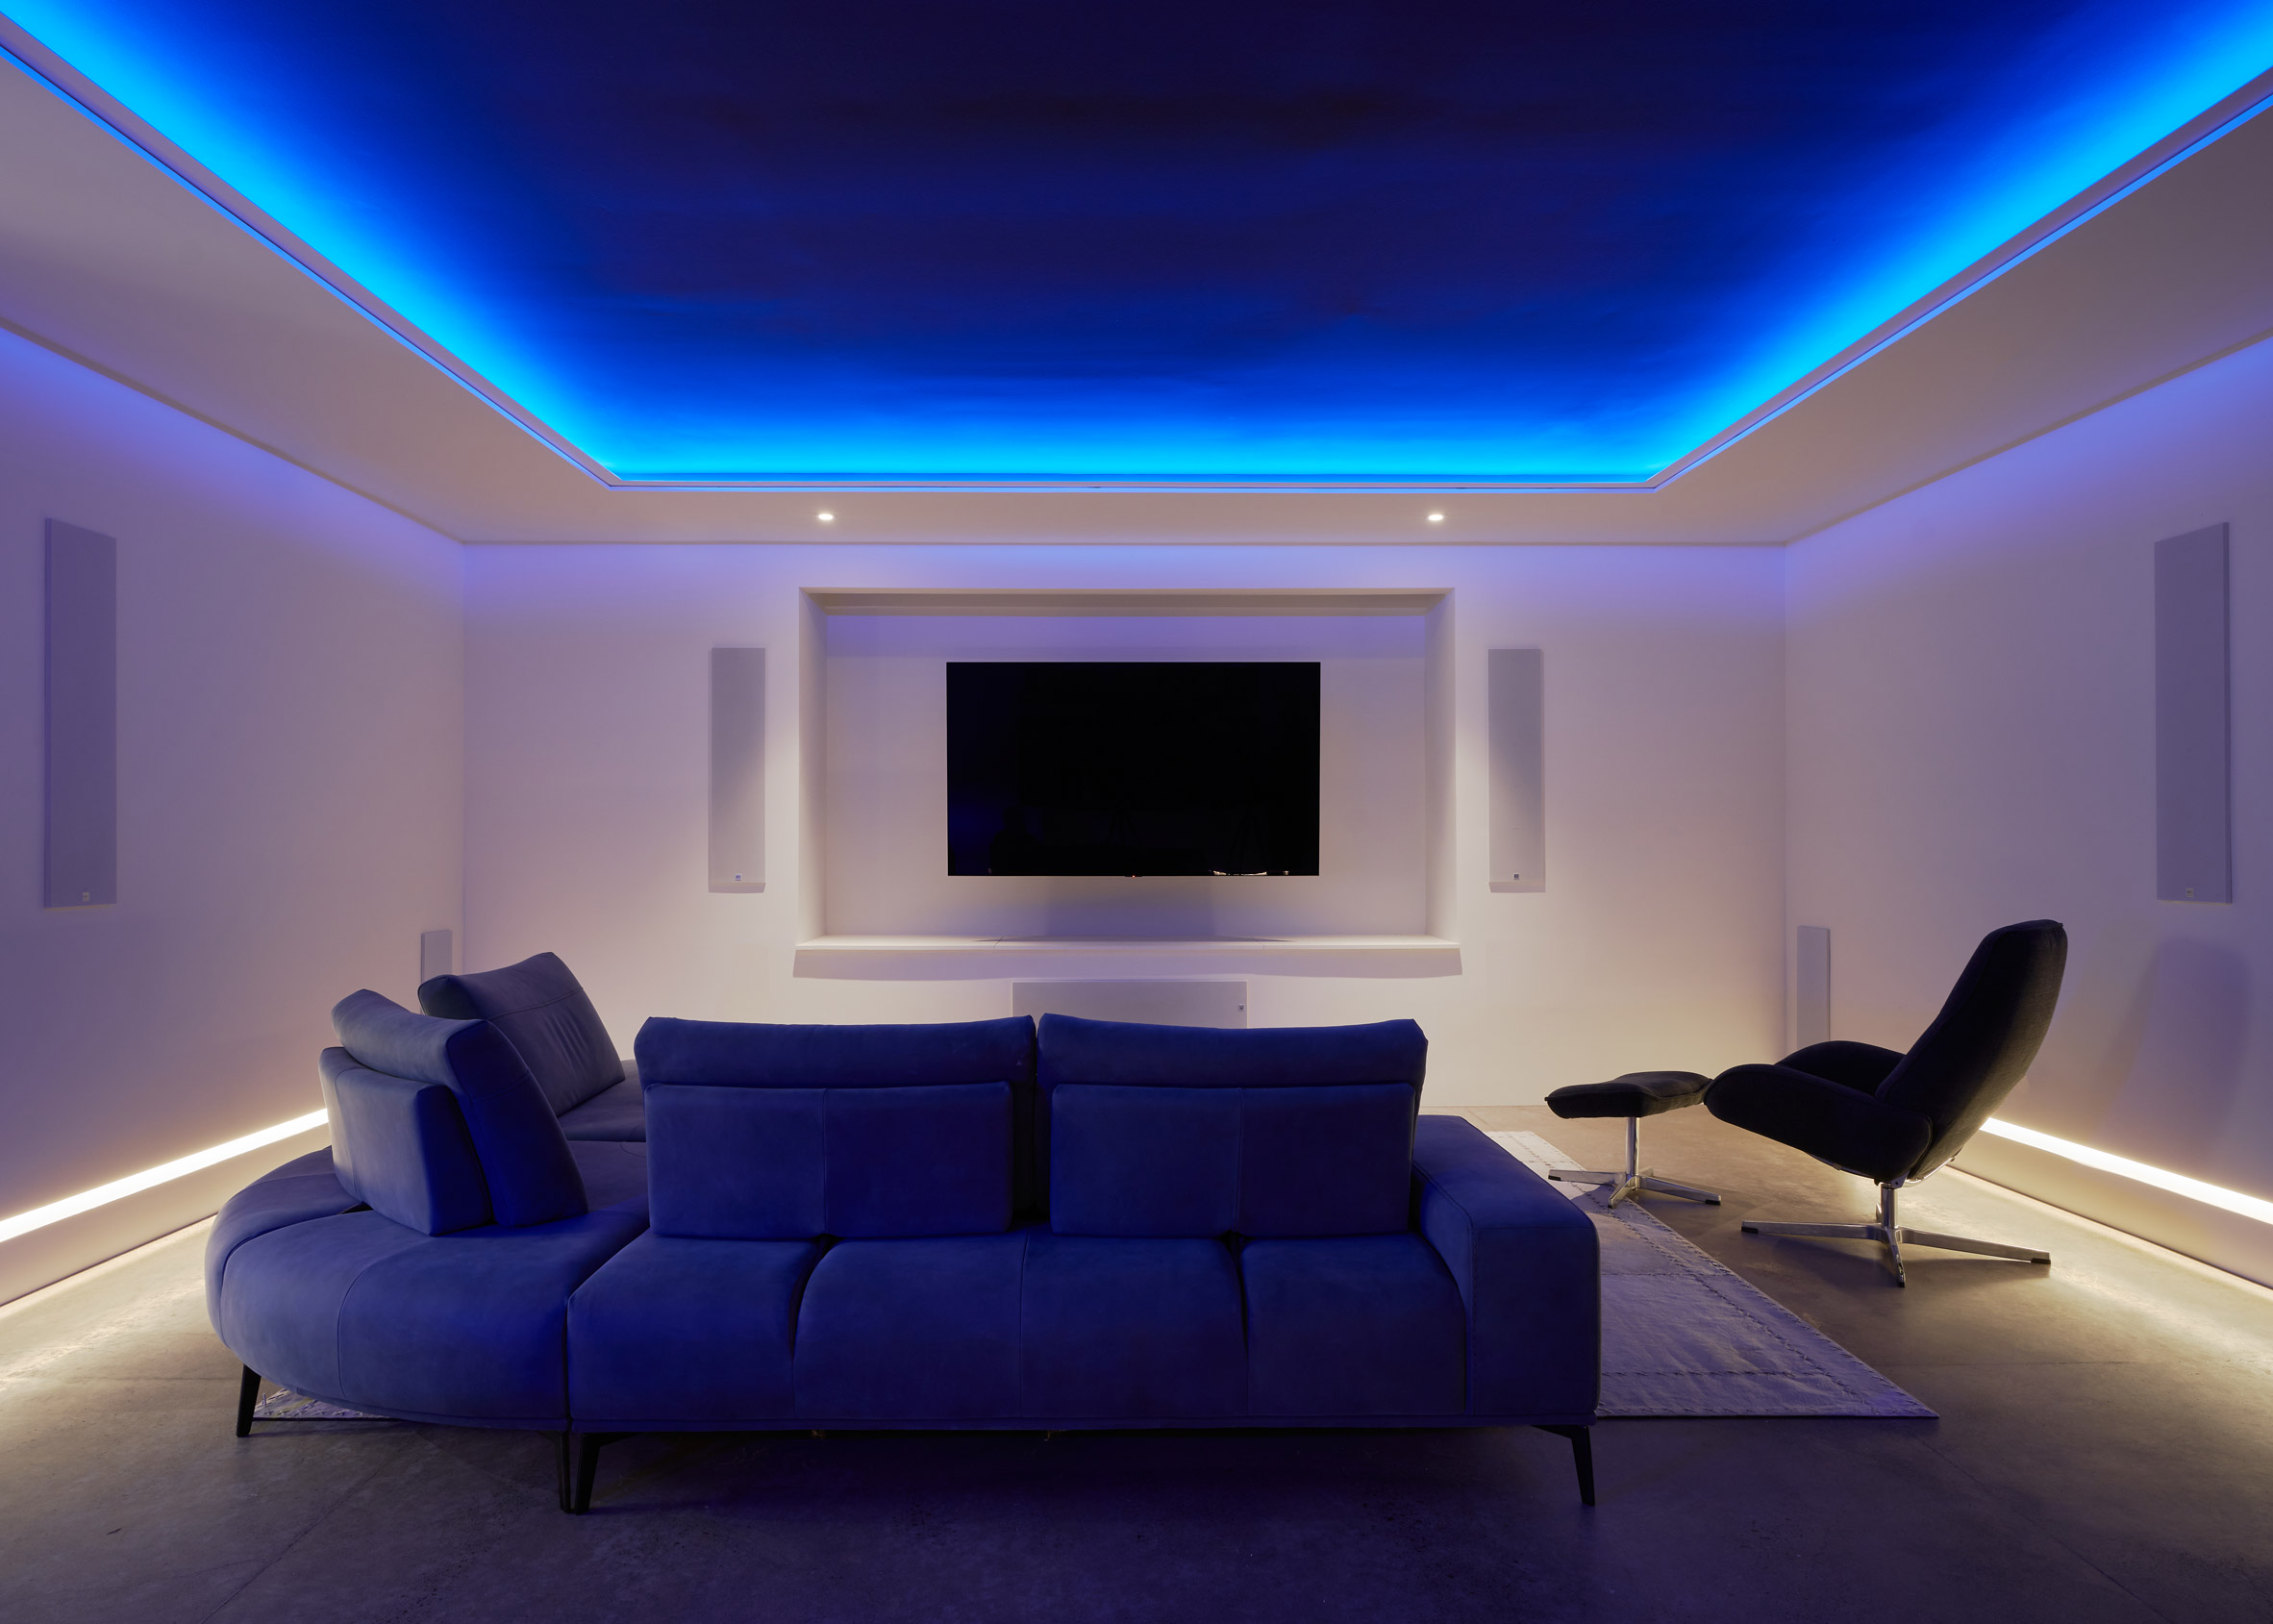 Basement of Oregon country house with blue-lit ceiling